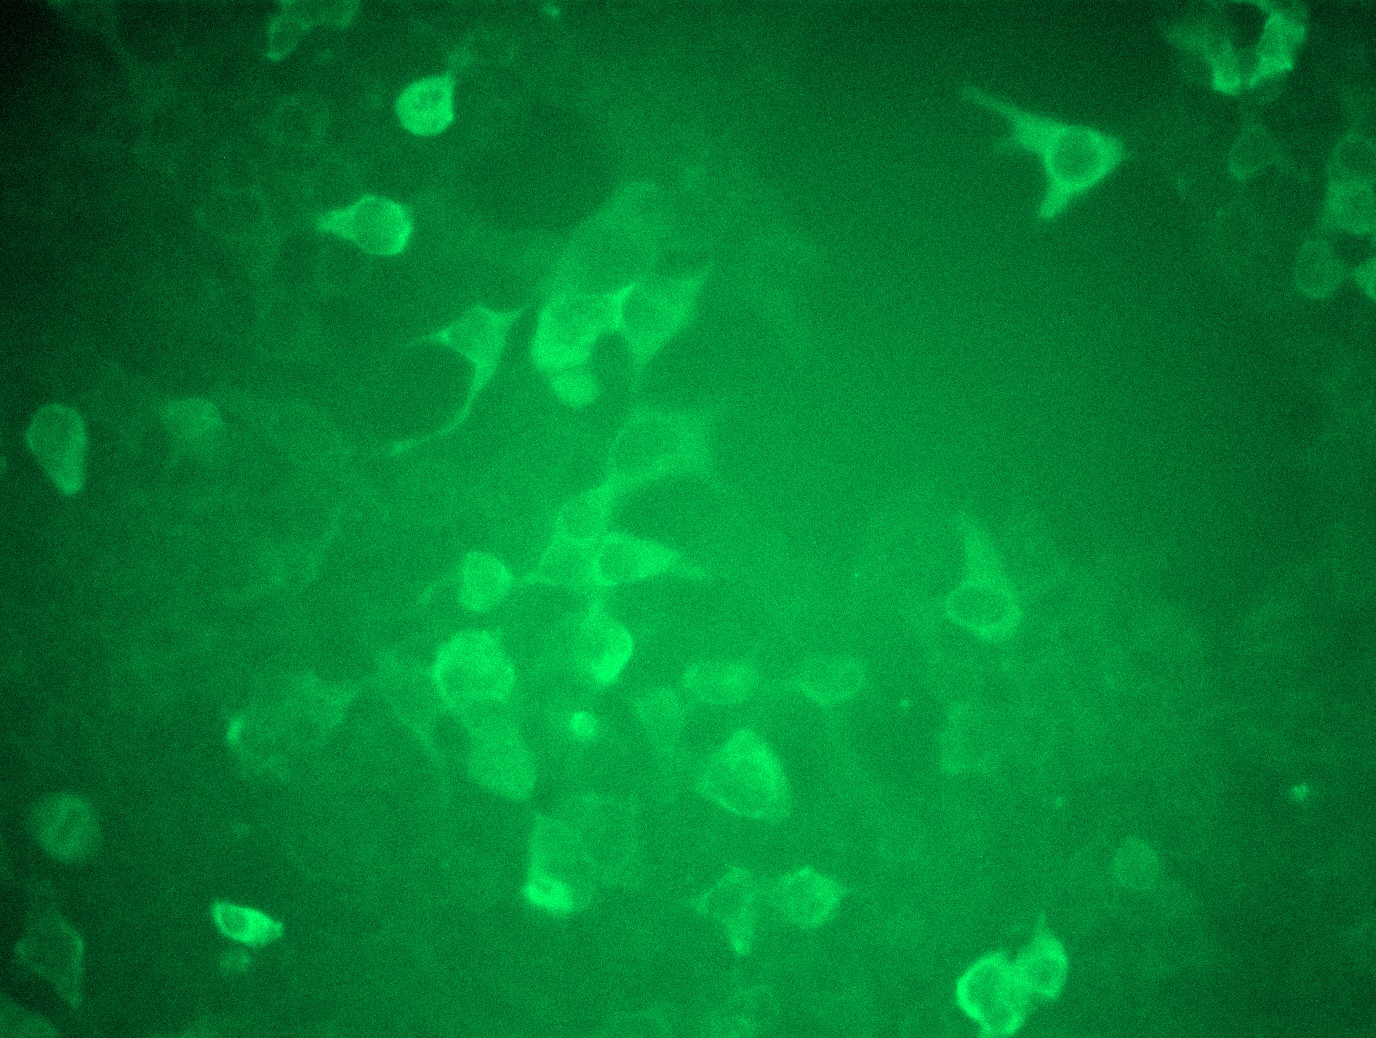 MR226419L3 was used to prepare Lentiviral particles using TR30037 packaging kit. HEK293T cells were transduced with MR226419L3V particle to overexpress human Dhx36-Myc-DDK fusion protein.